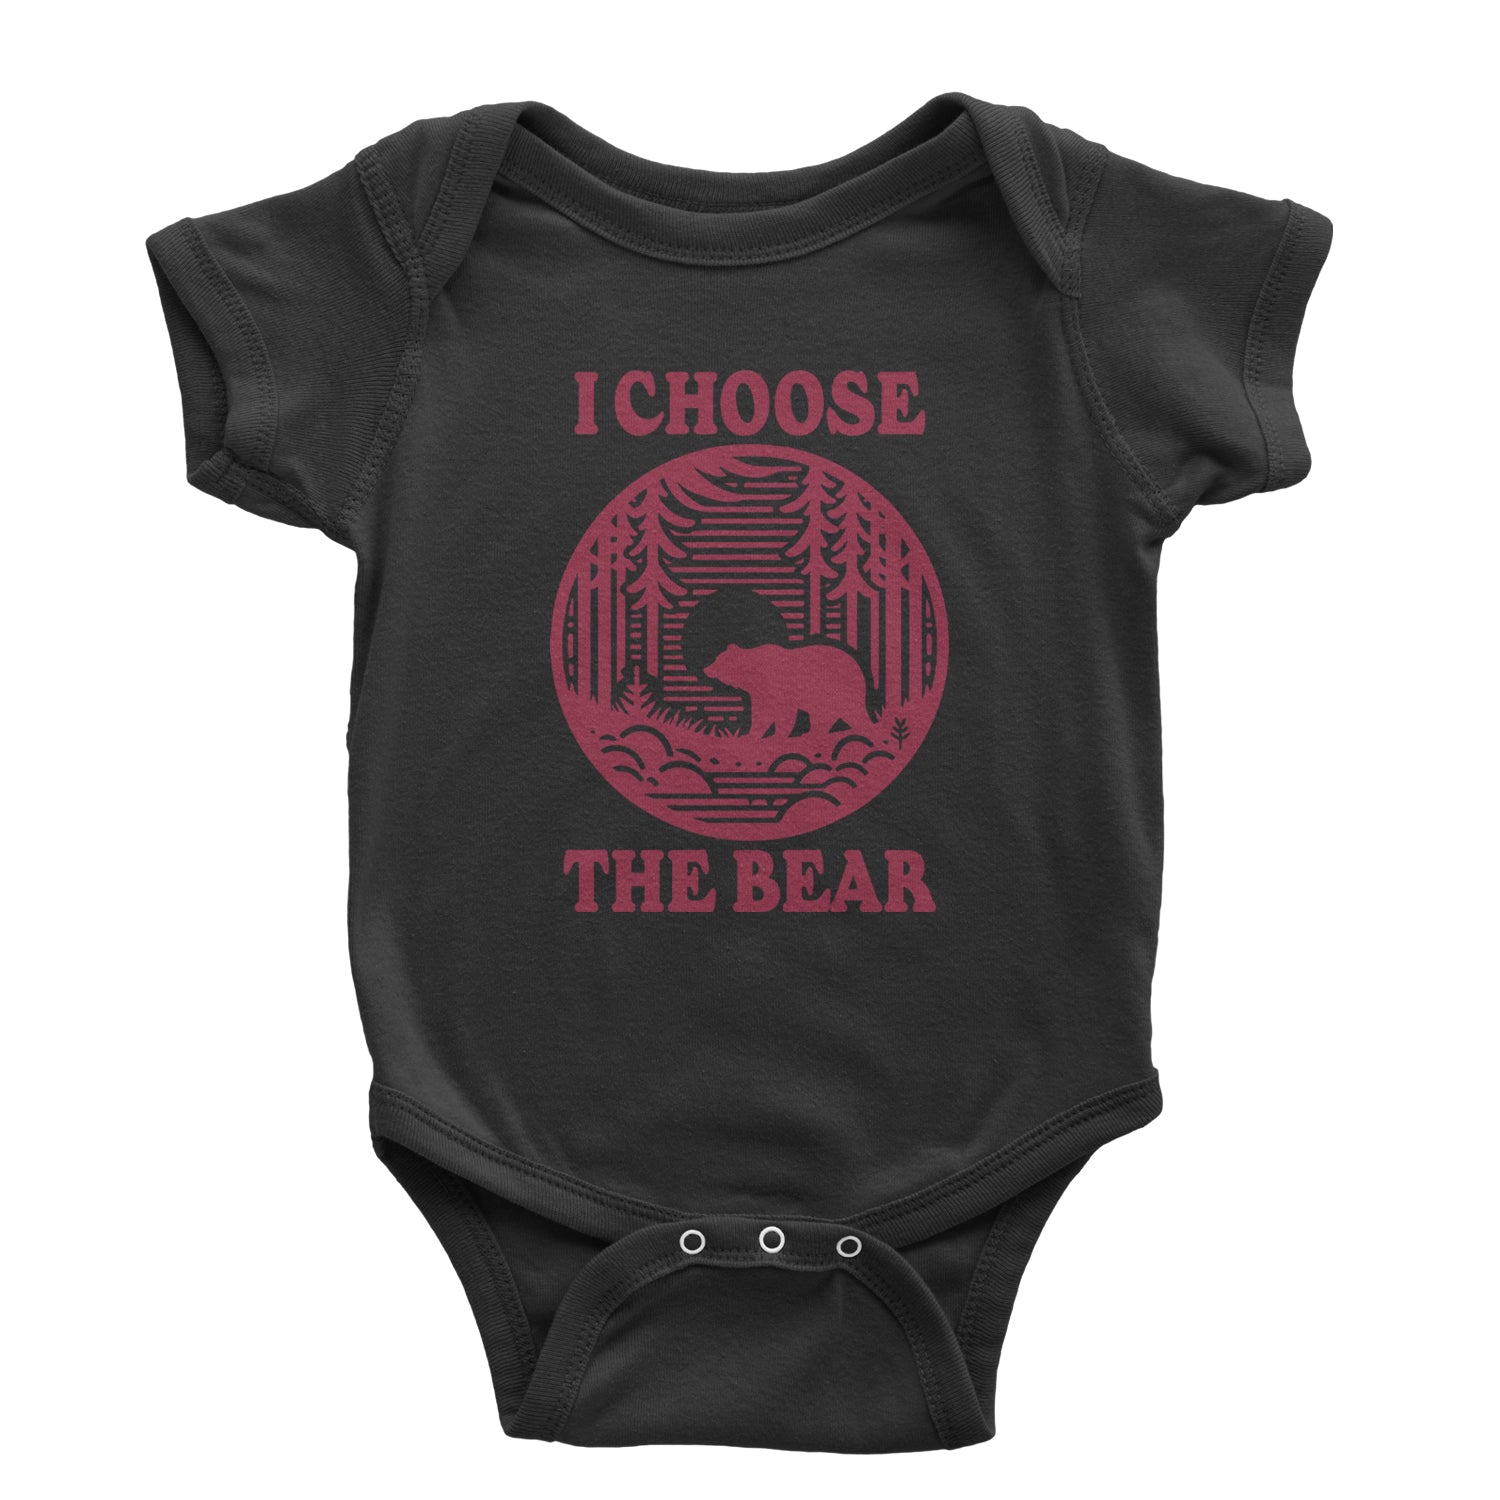 I Choose The Bear Companion Survival Choice Infant One-Piece Romper Bodysuit and Toddler T-shirt